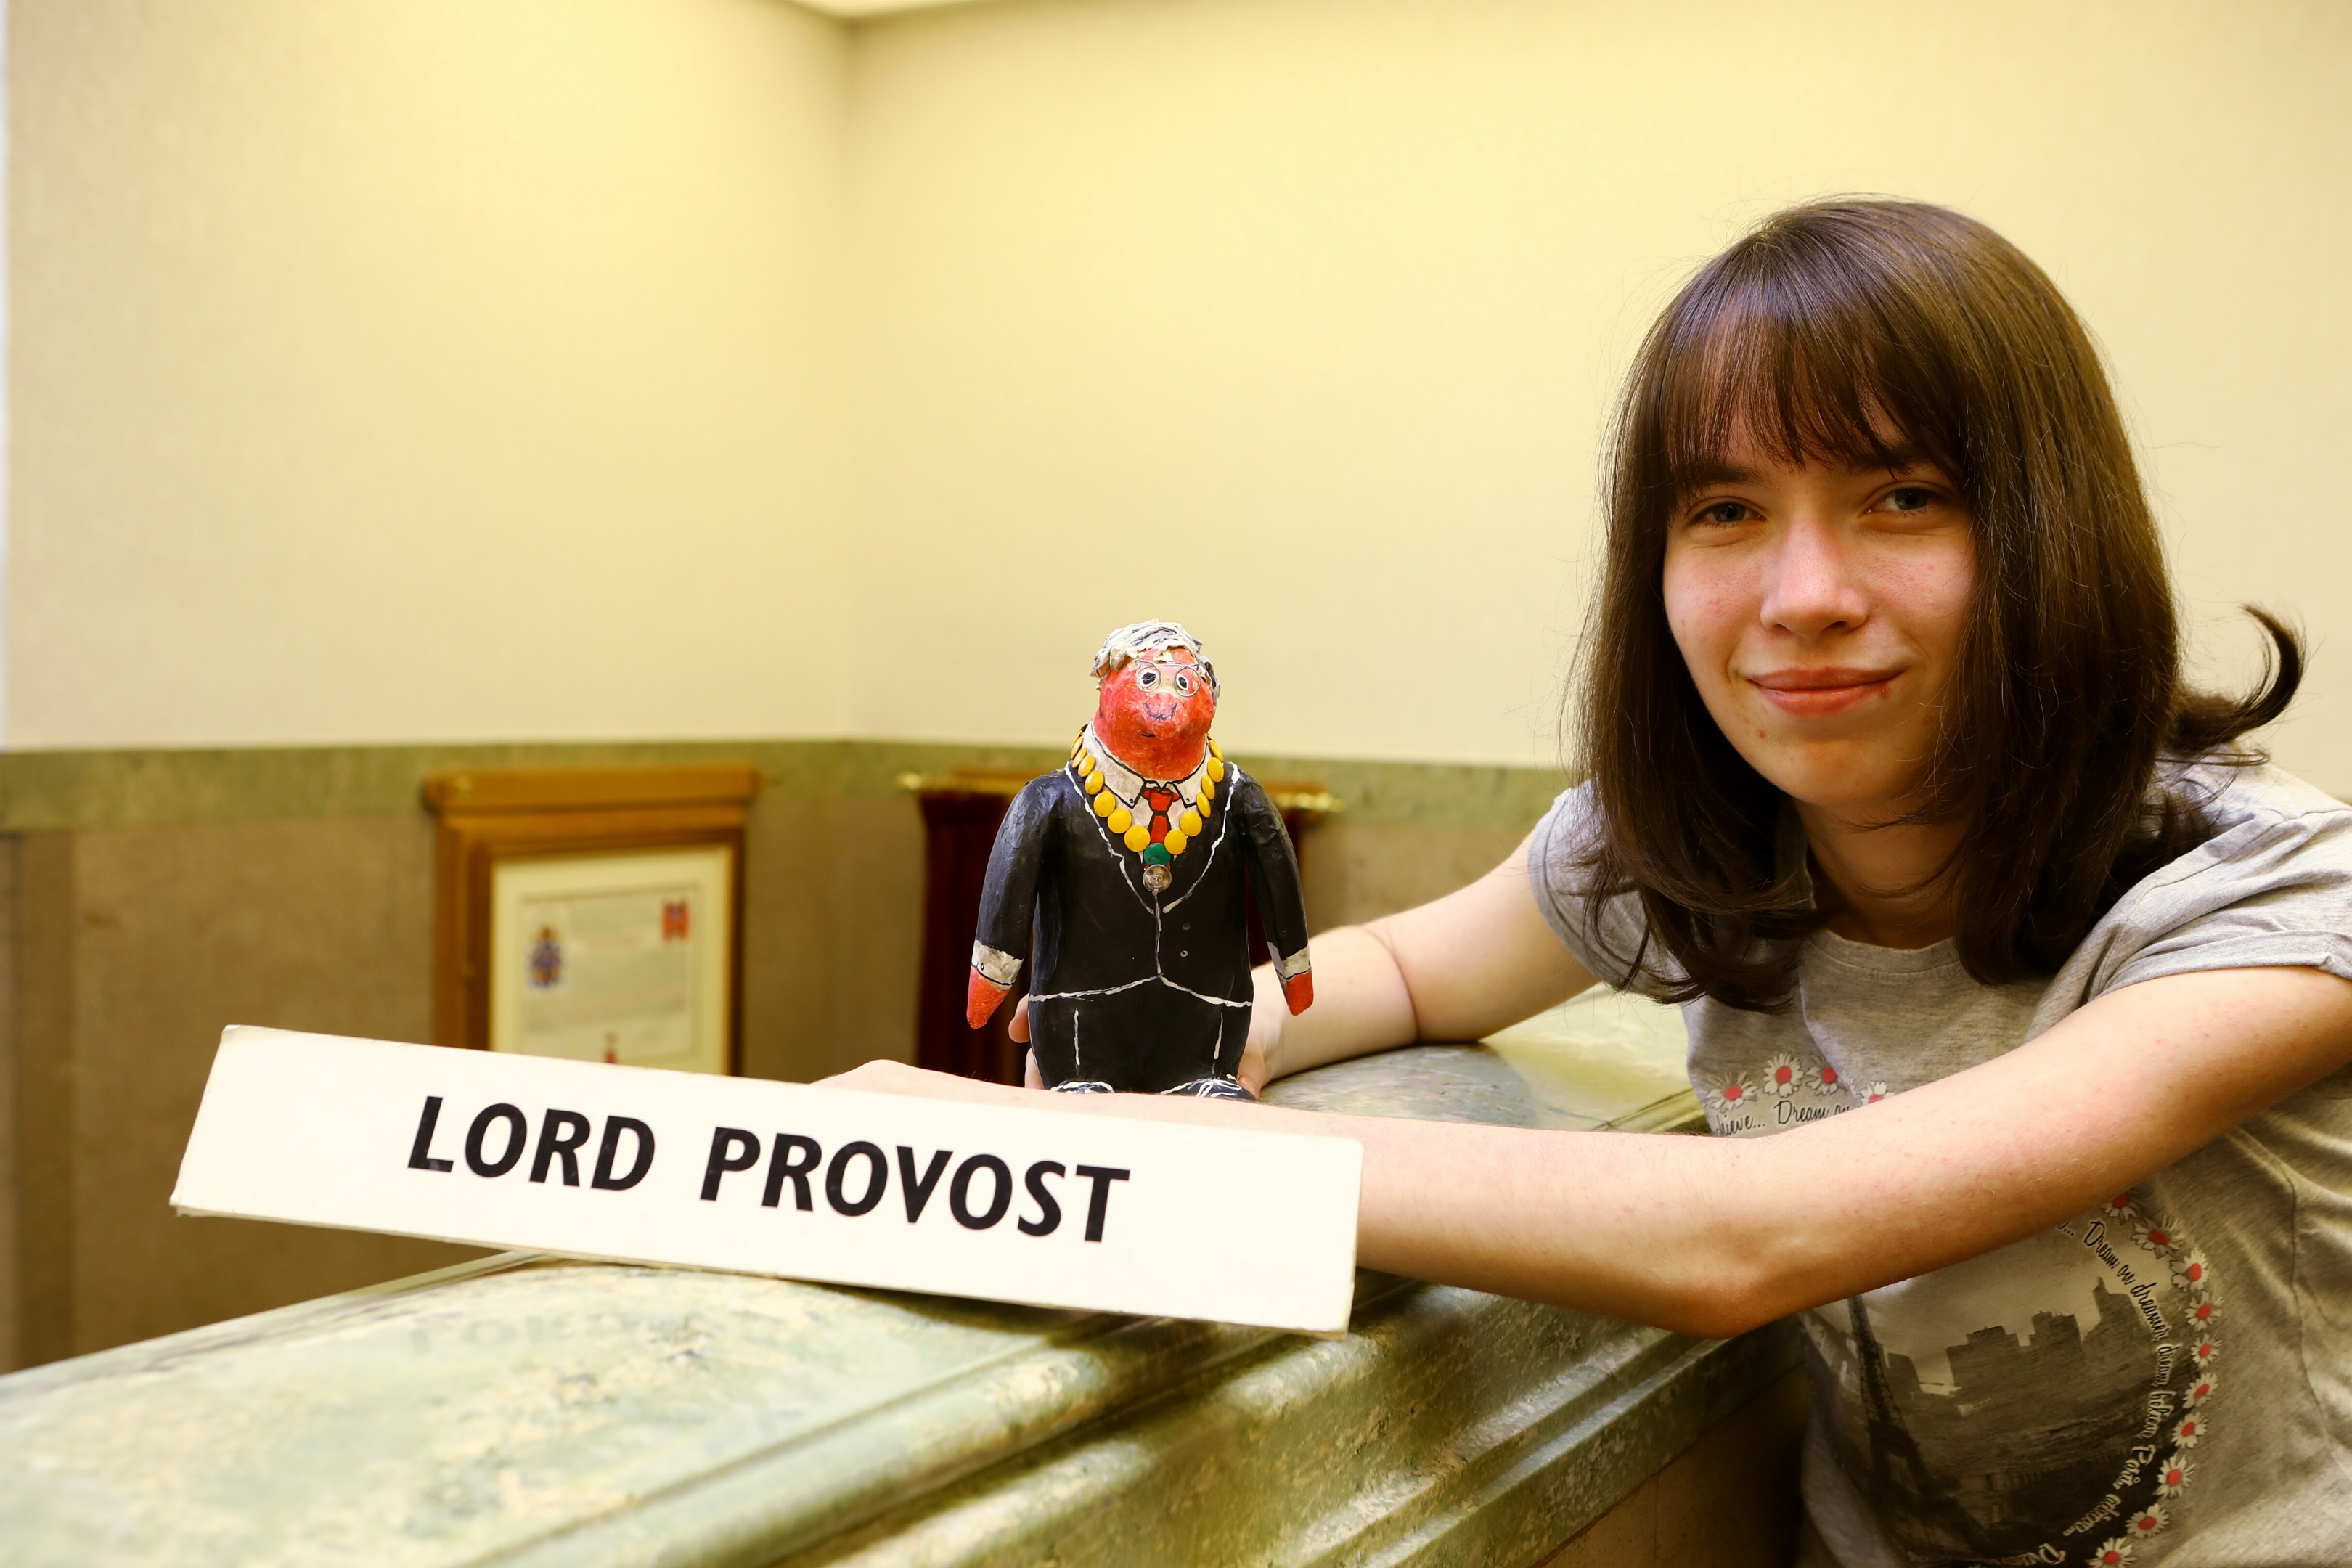 Chloe Townsend, 16, in the City Chambers with her Lord Provost Penguin, that she made for Lord Provost Ian Borthwick.